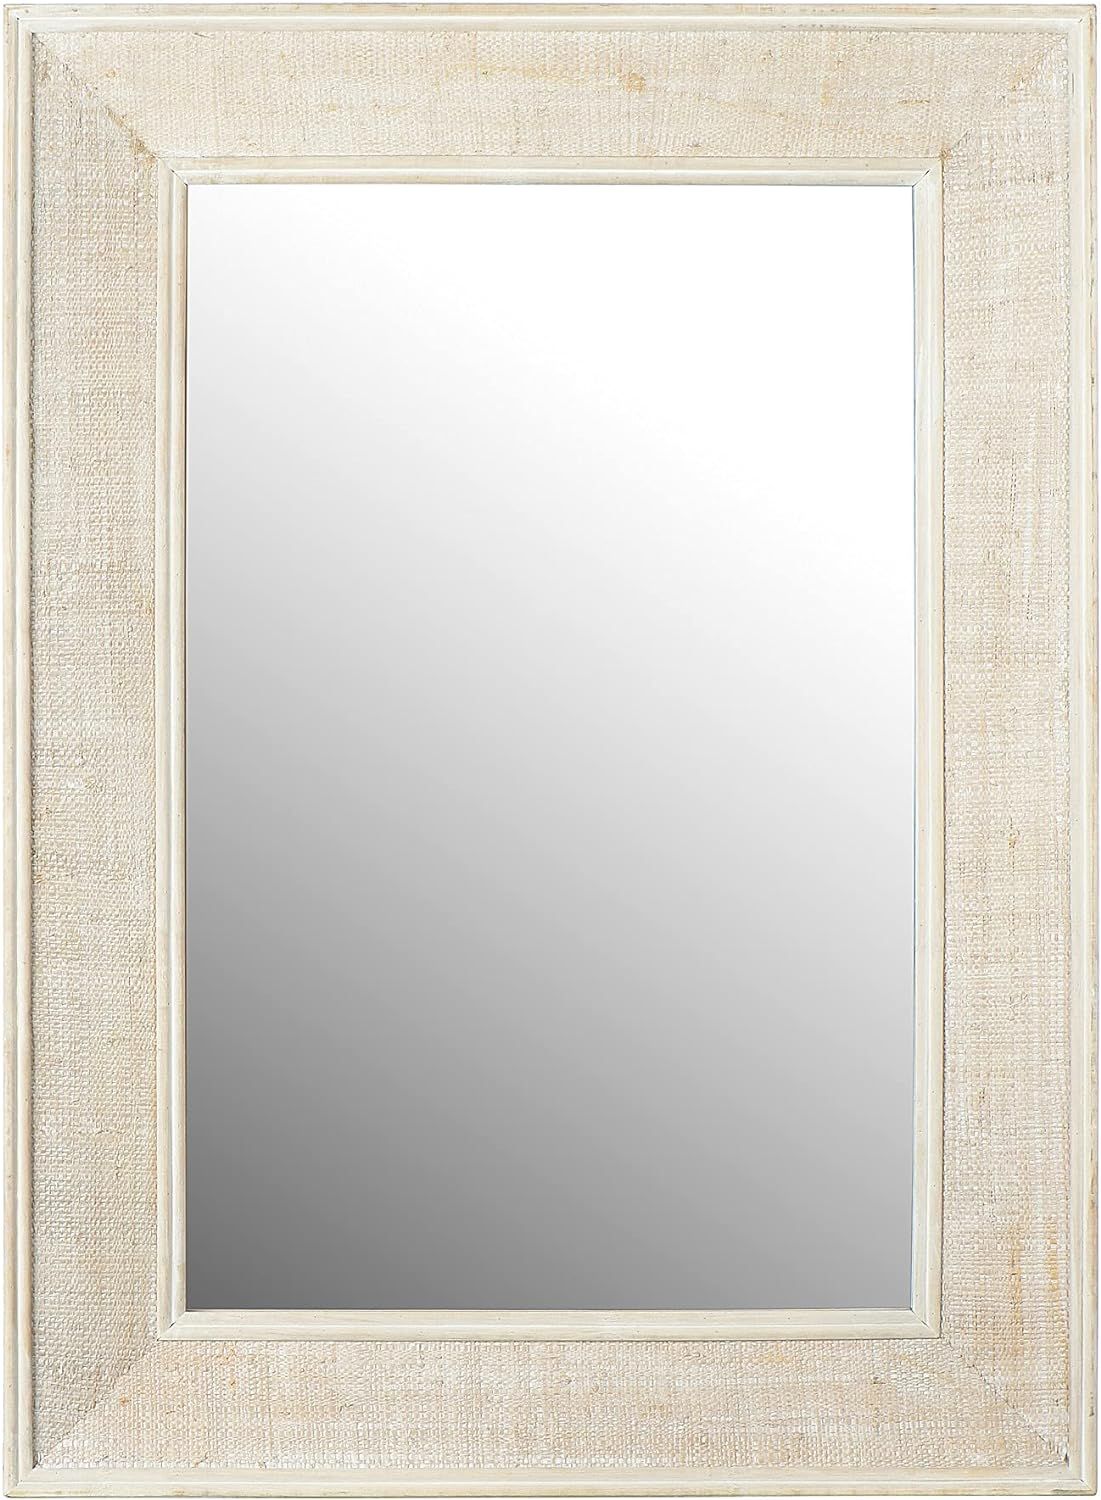 Creative Co-Op Rectangle Wood Framed Wall Mirror with Rattan Detail, Natural | Amazon (US)